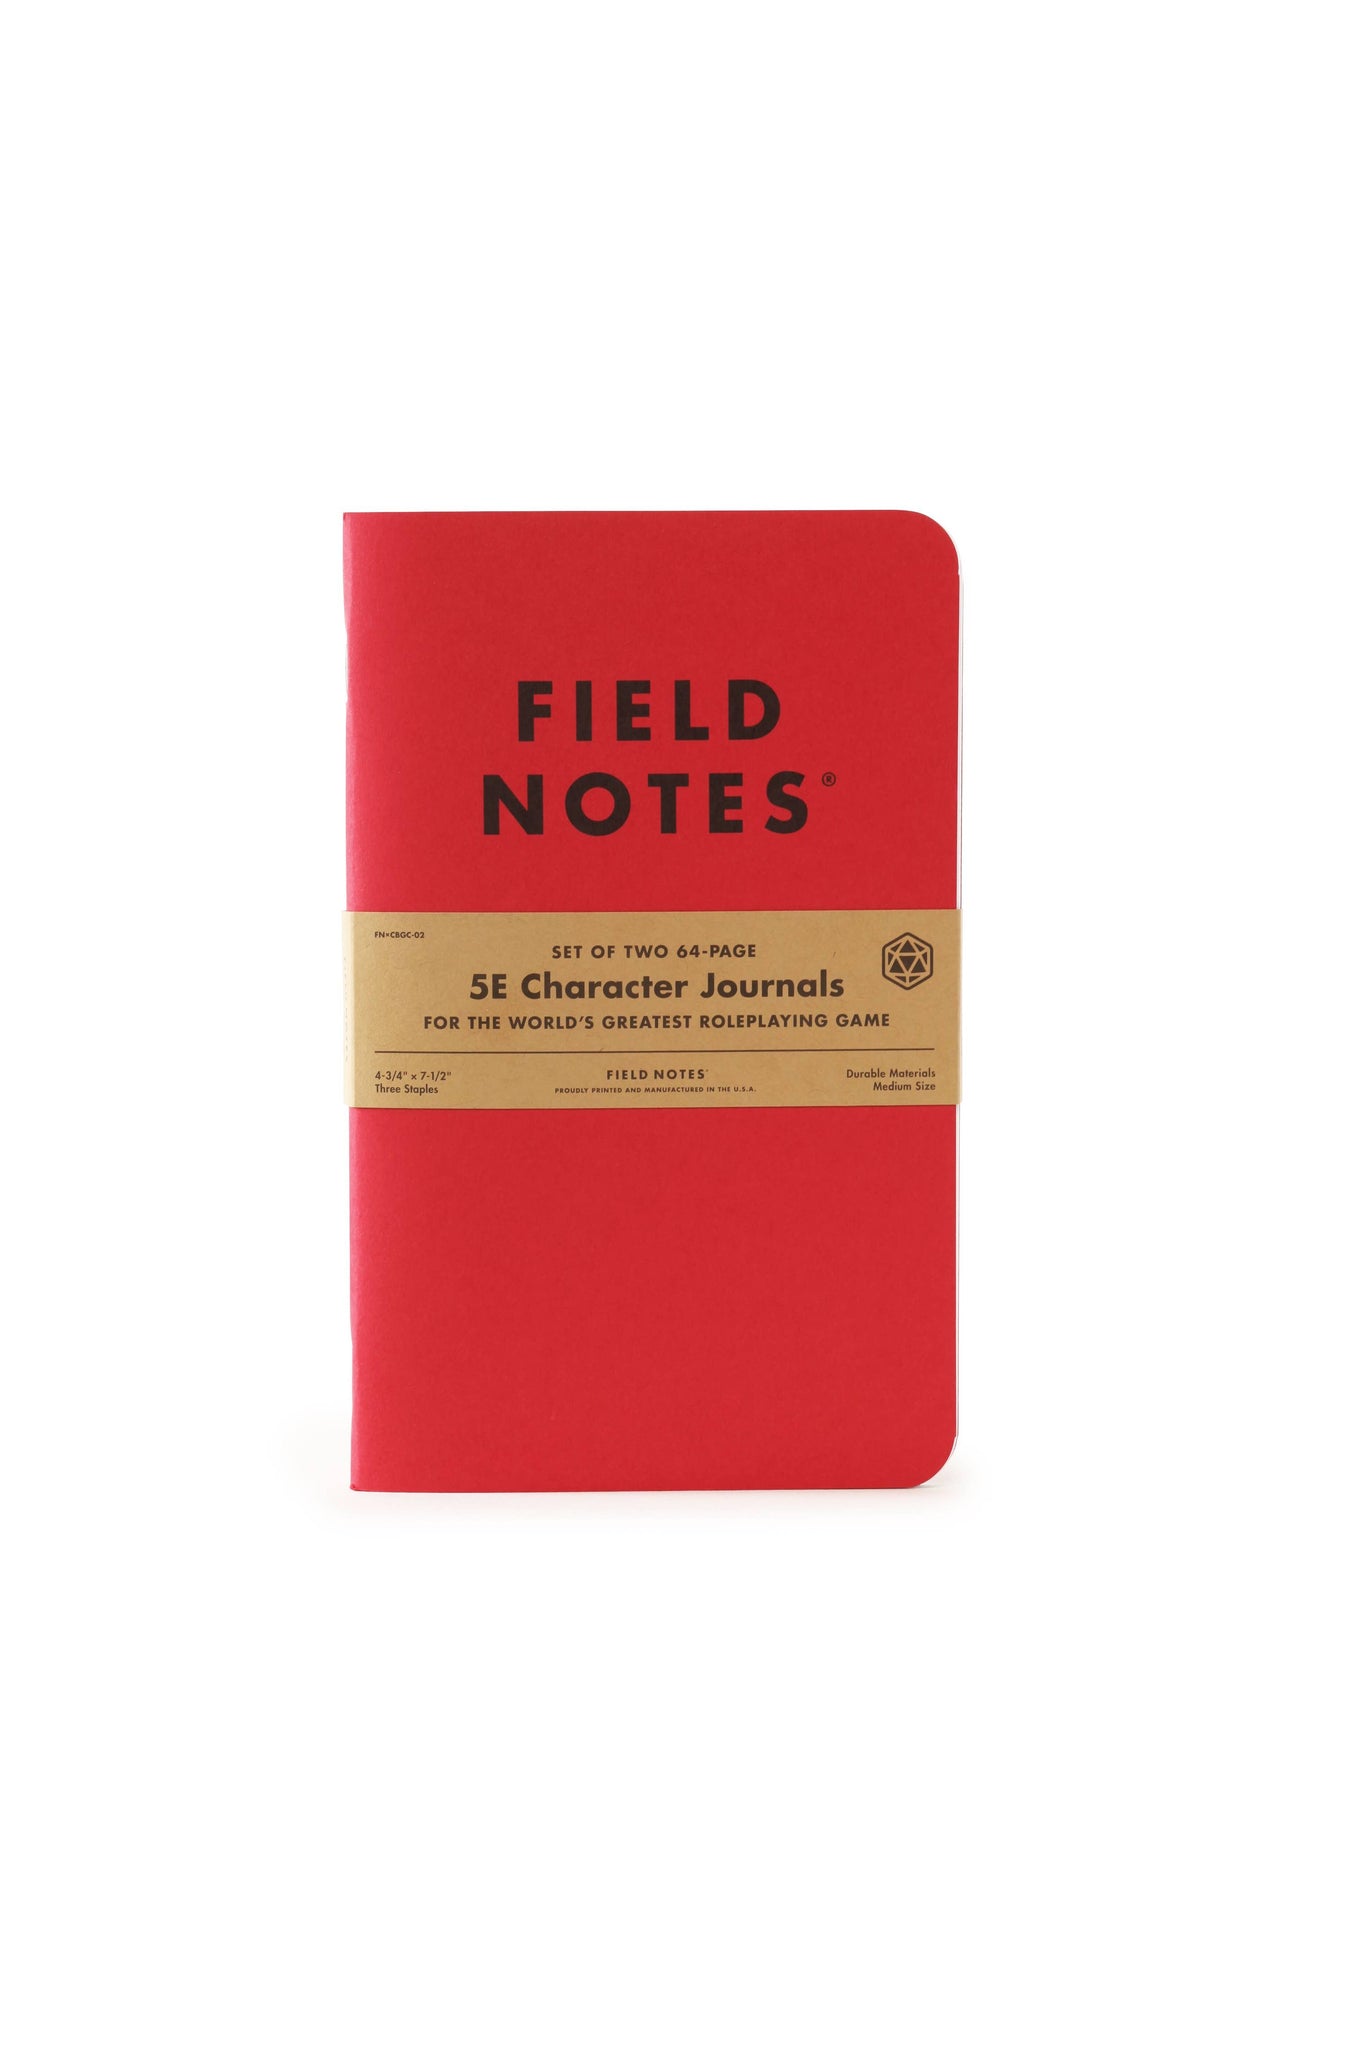 Field Notes - 5E Character Journals